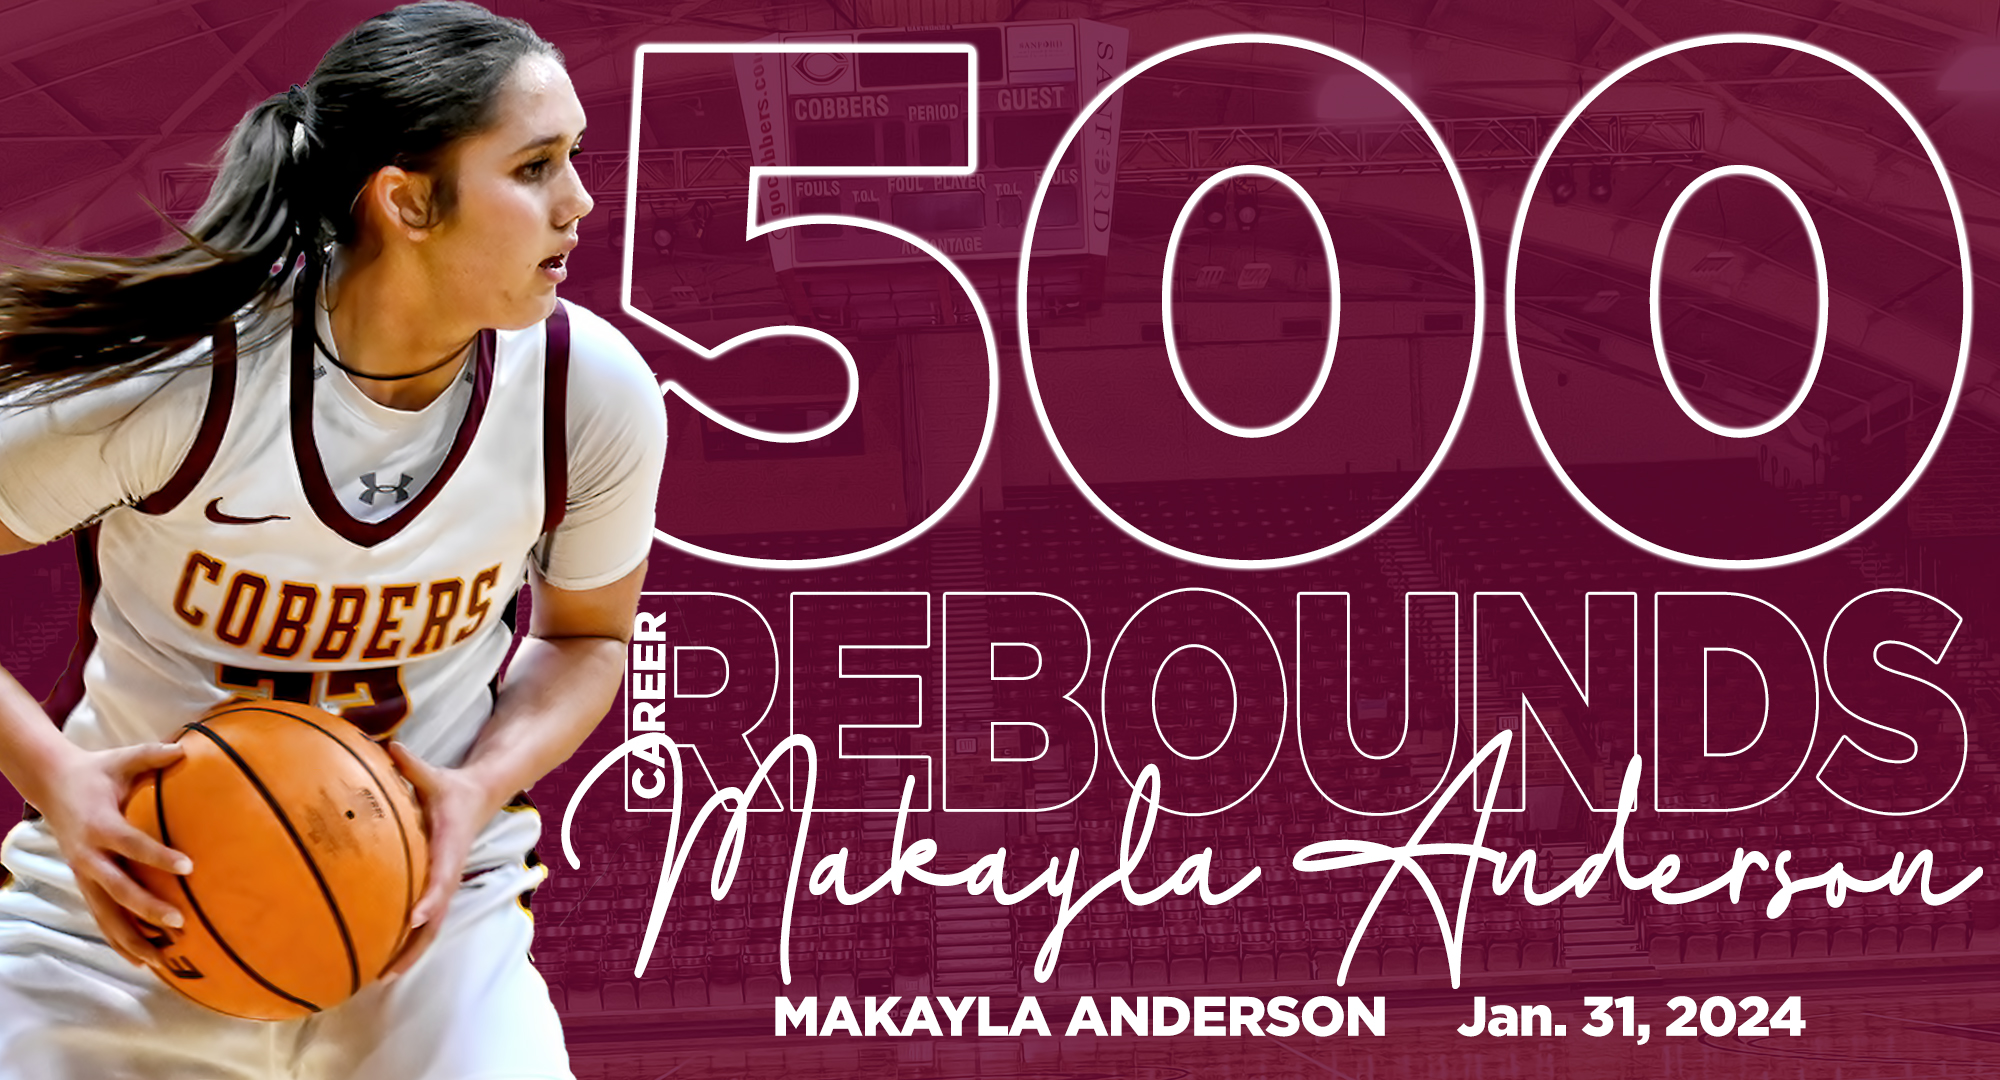 Makayla Anderson became the 20th player in program history to reach the 500 rebound milestone in the Cobbers' game with St. Mary's.